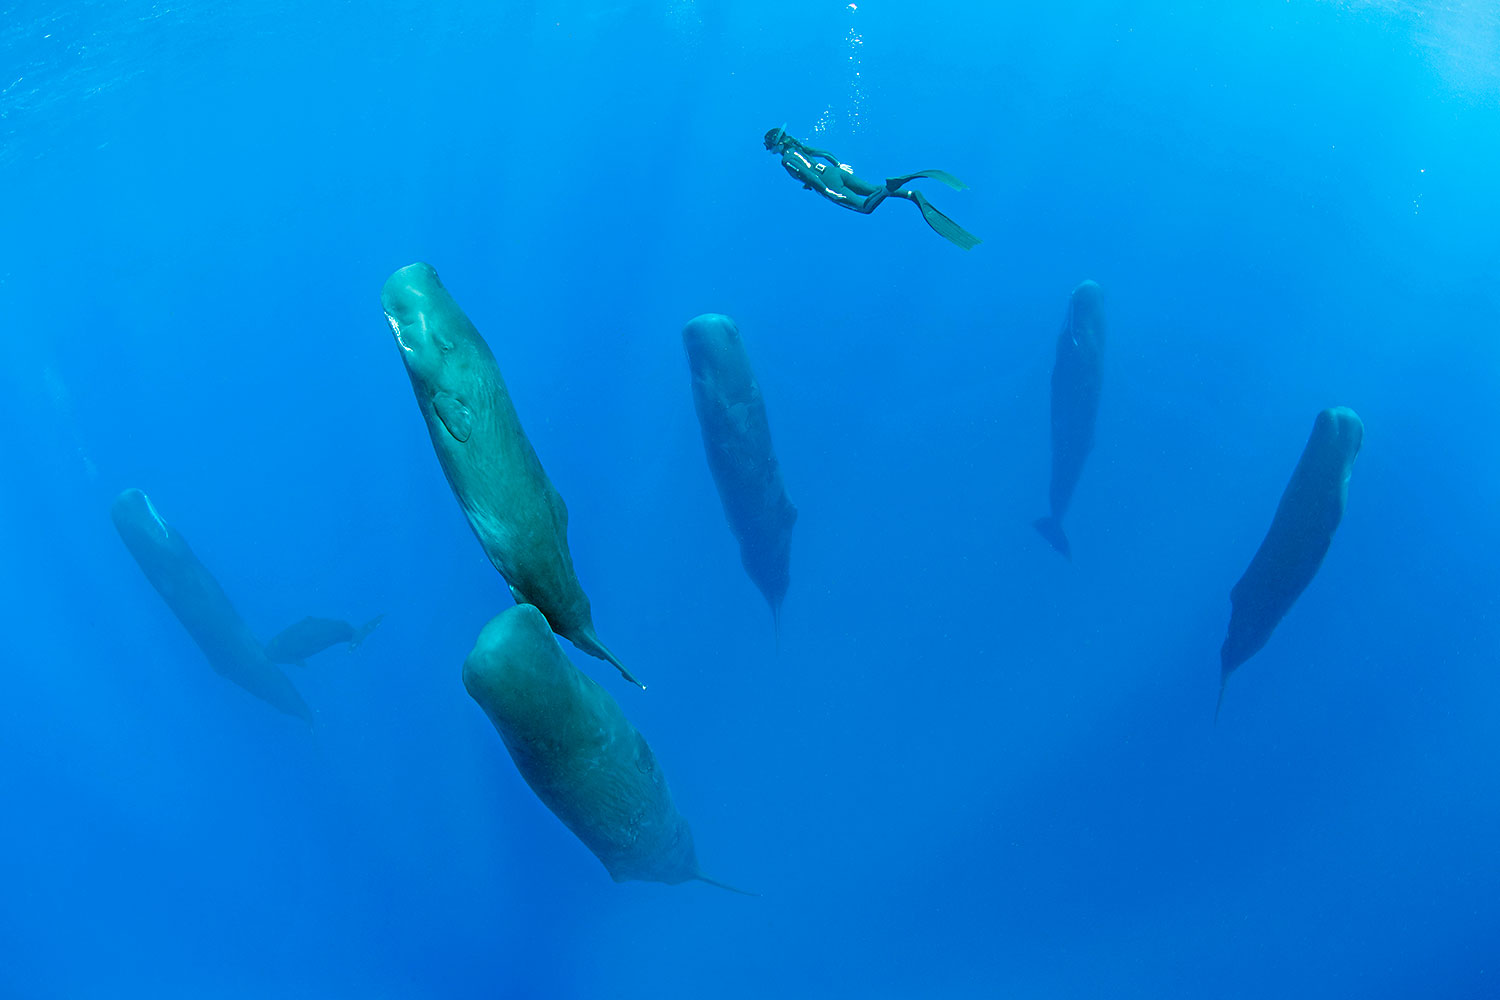 Whales found resting motionless and recorded sleeping